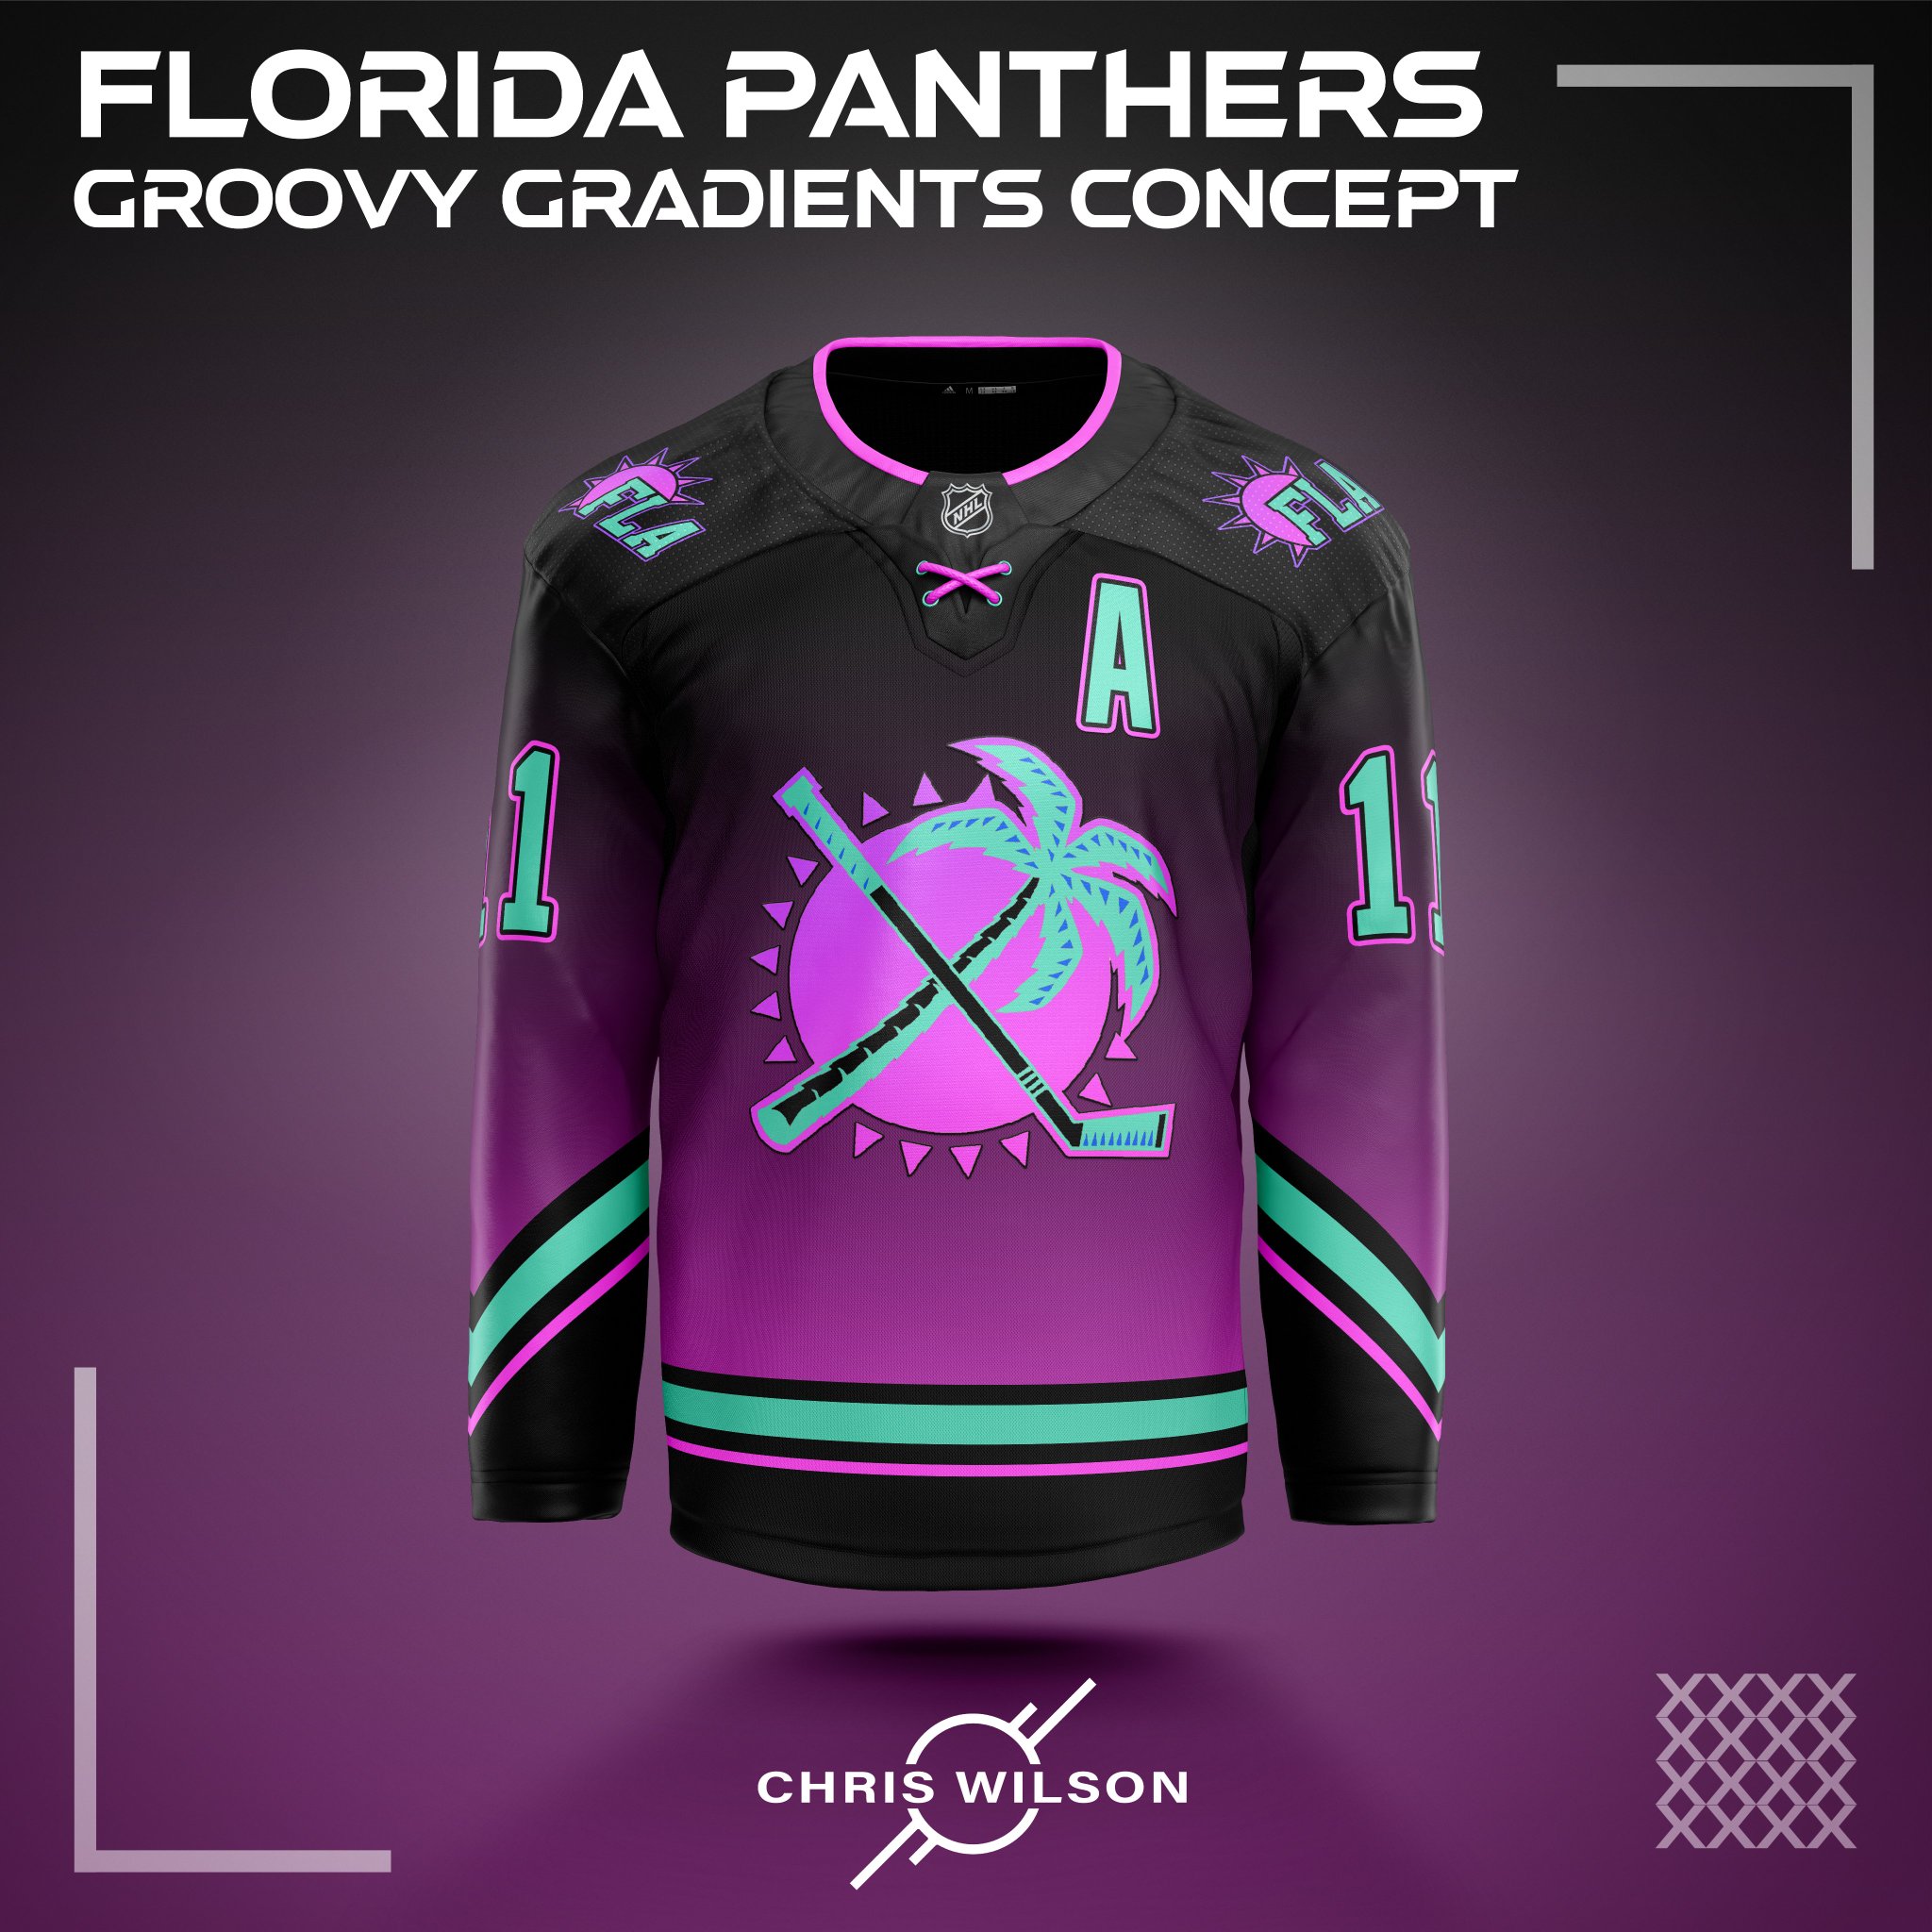 This Miami Vice Florida Panthers jersey is NEXT LEVEL - Article